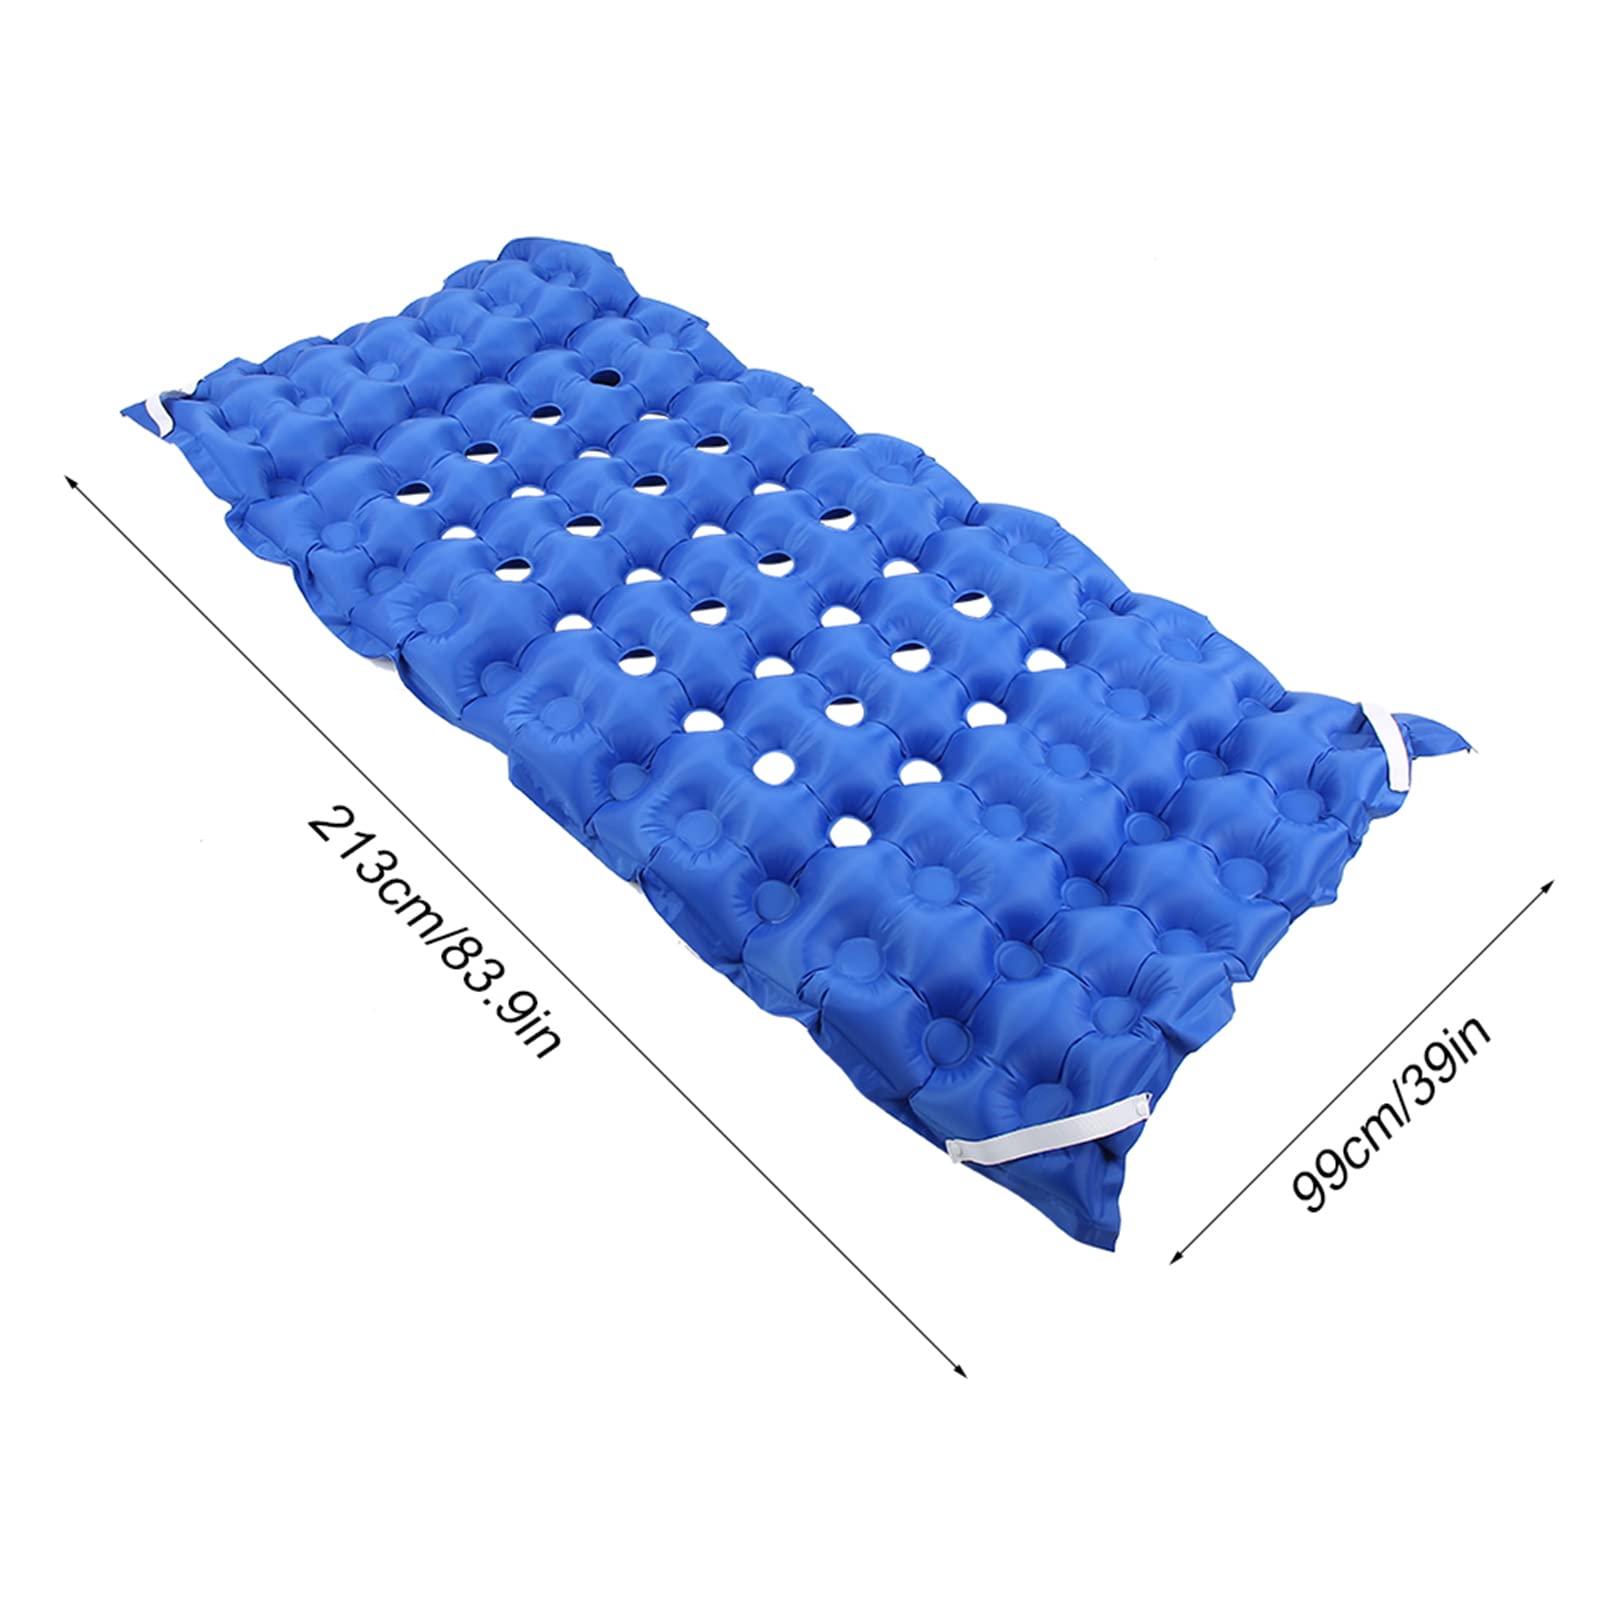 Luqeeg Alternating Pressure Mattress for Bed Sores, Bed Pad to Prevent Bed Sores for Hospital Bed, Bed Sore Prevention, Bedridden Treatment, Inflatable Air Mattress with Quiet Air Pump, 83.9 x 39in